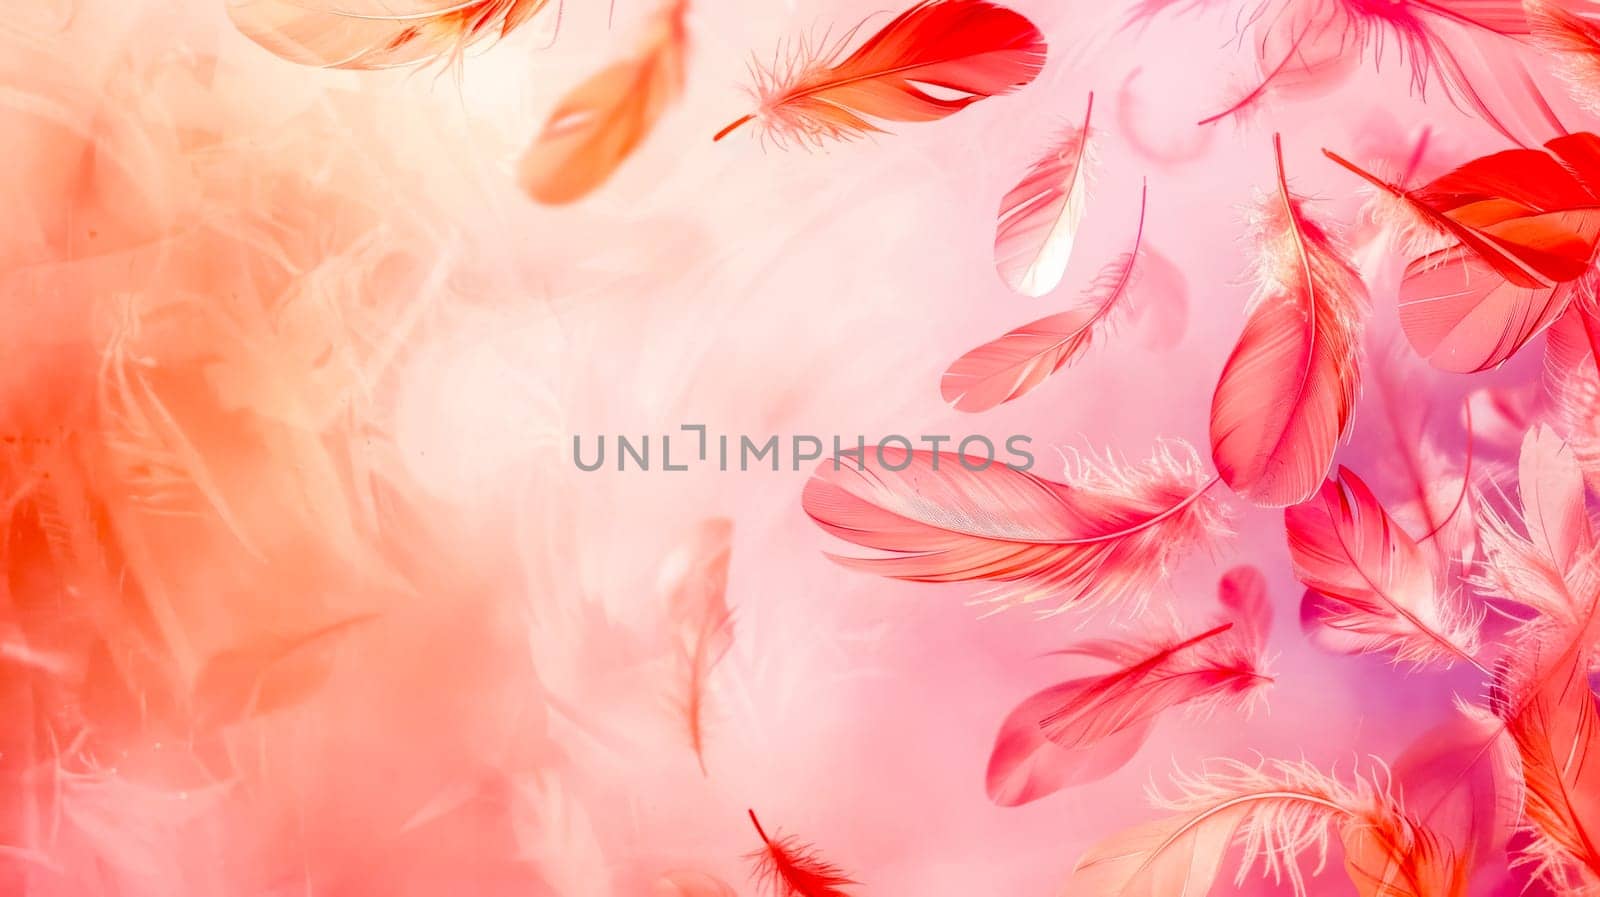 Beautiful and delicate ethereal pink feathers background with soft, floating, and romantic elements for a dreamy, light, and airy abstract design